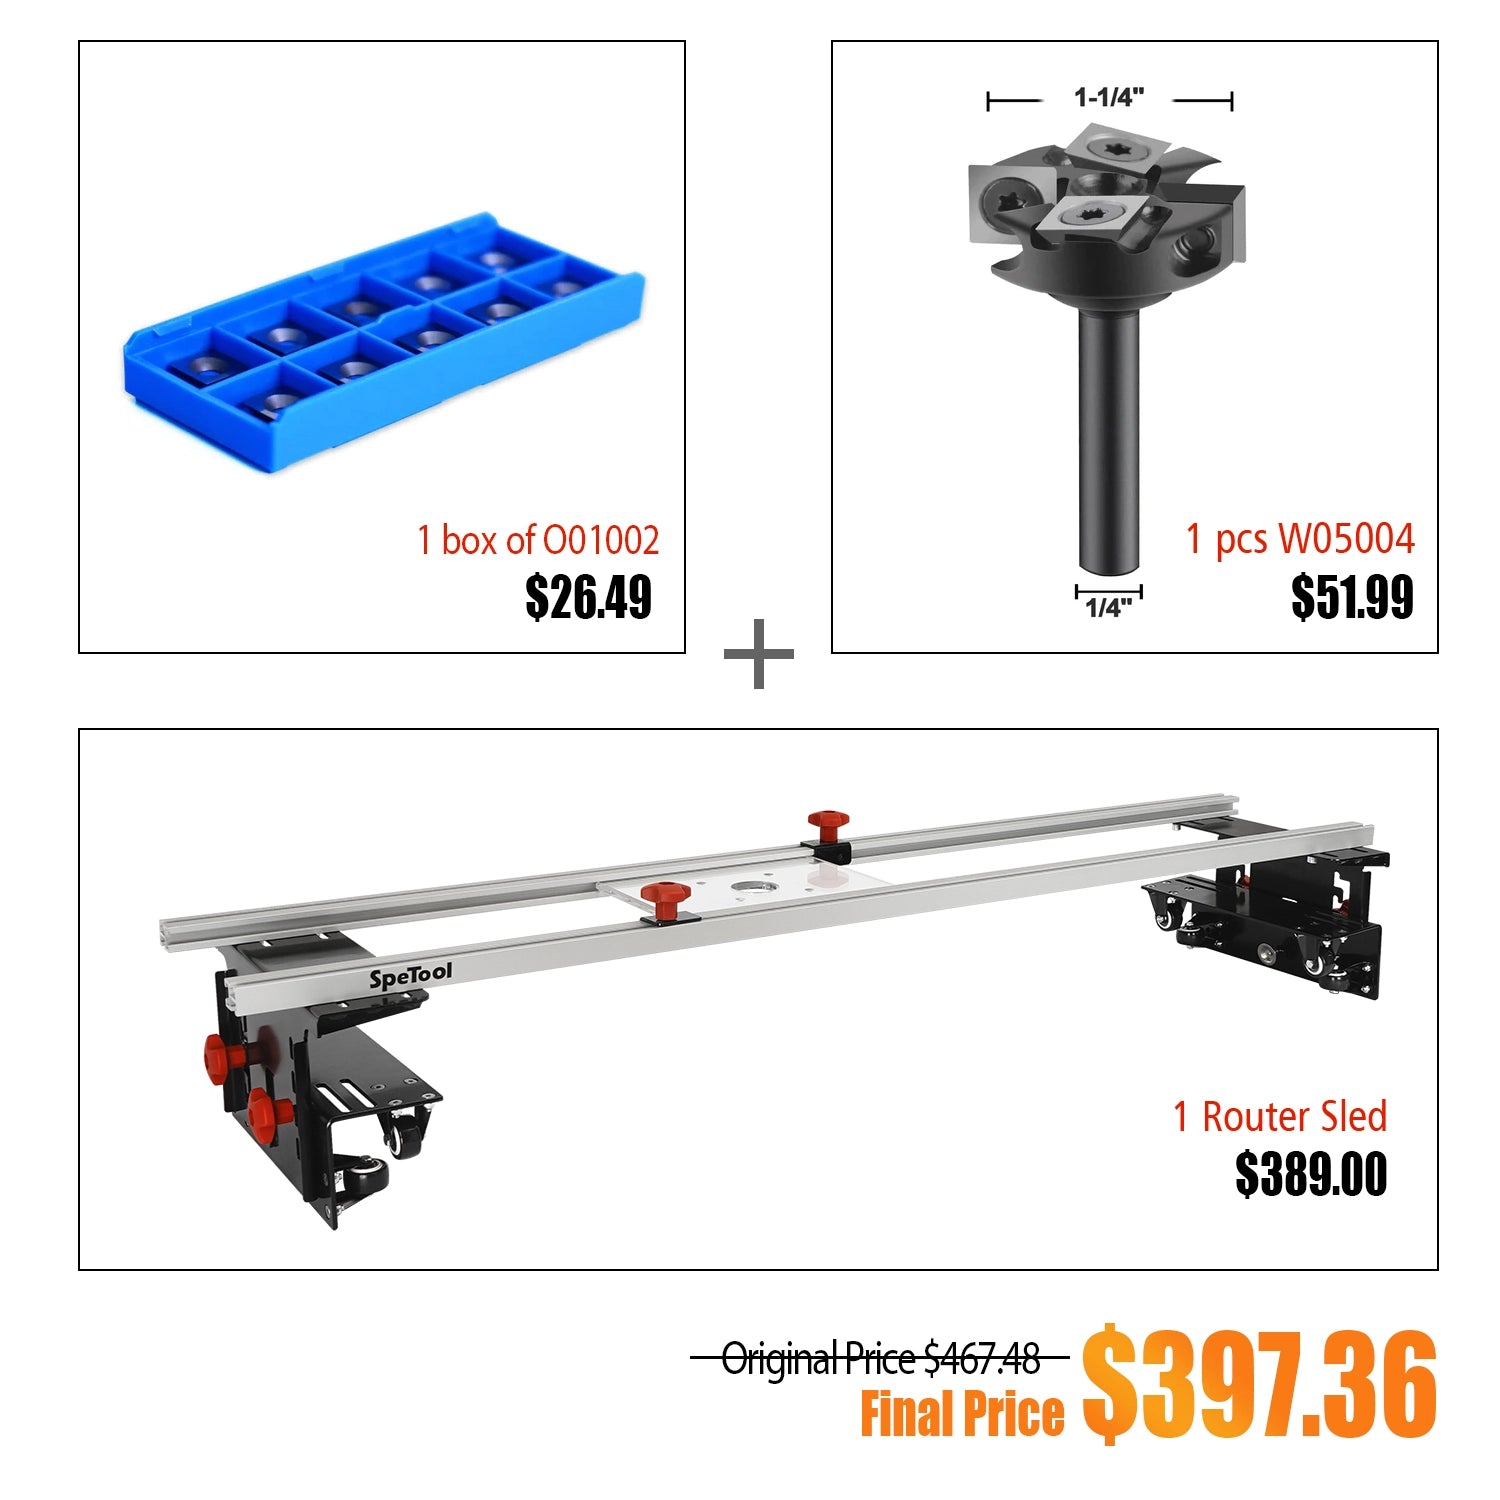 !!!【Pre-ordering】Bundle buying Save Up To $74 | SpeTool Cratos S01001 Machinist-Grade Router Sled & Spoilboard Surfacing Bits & Carbide Insert Kits